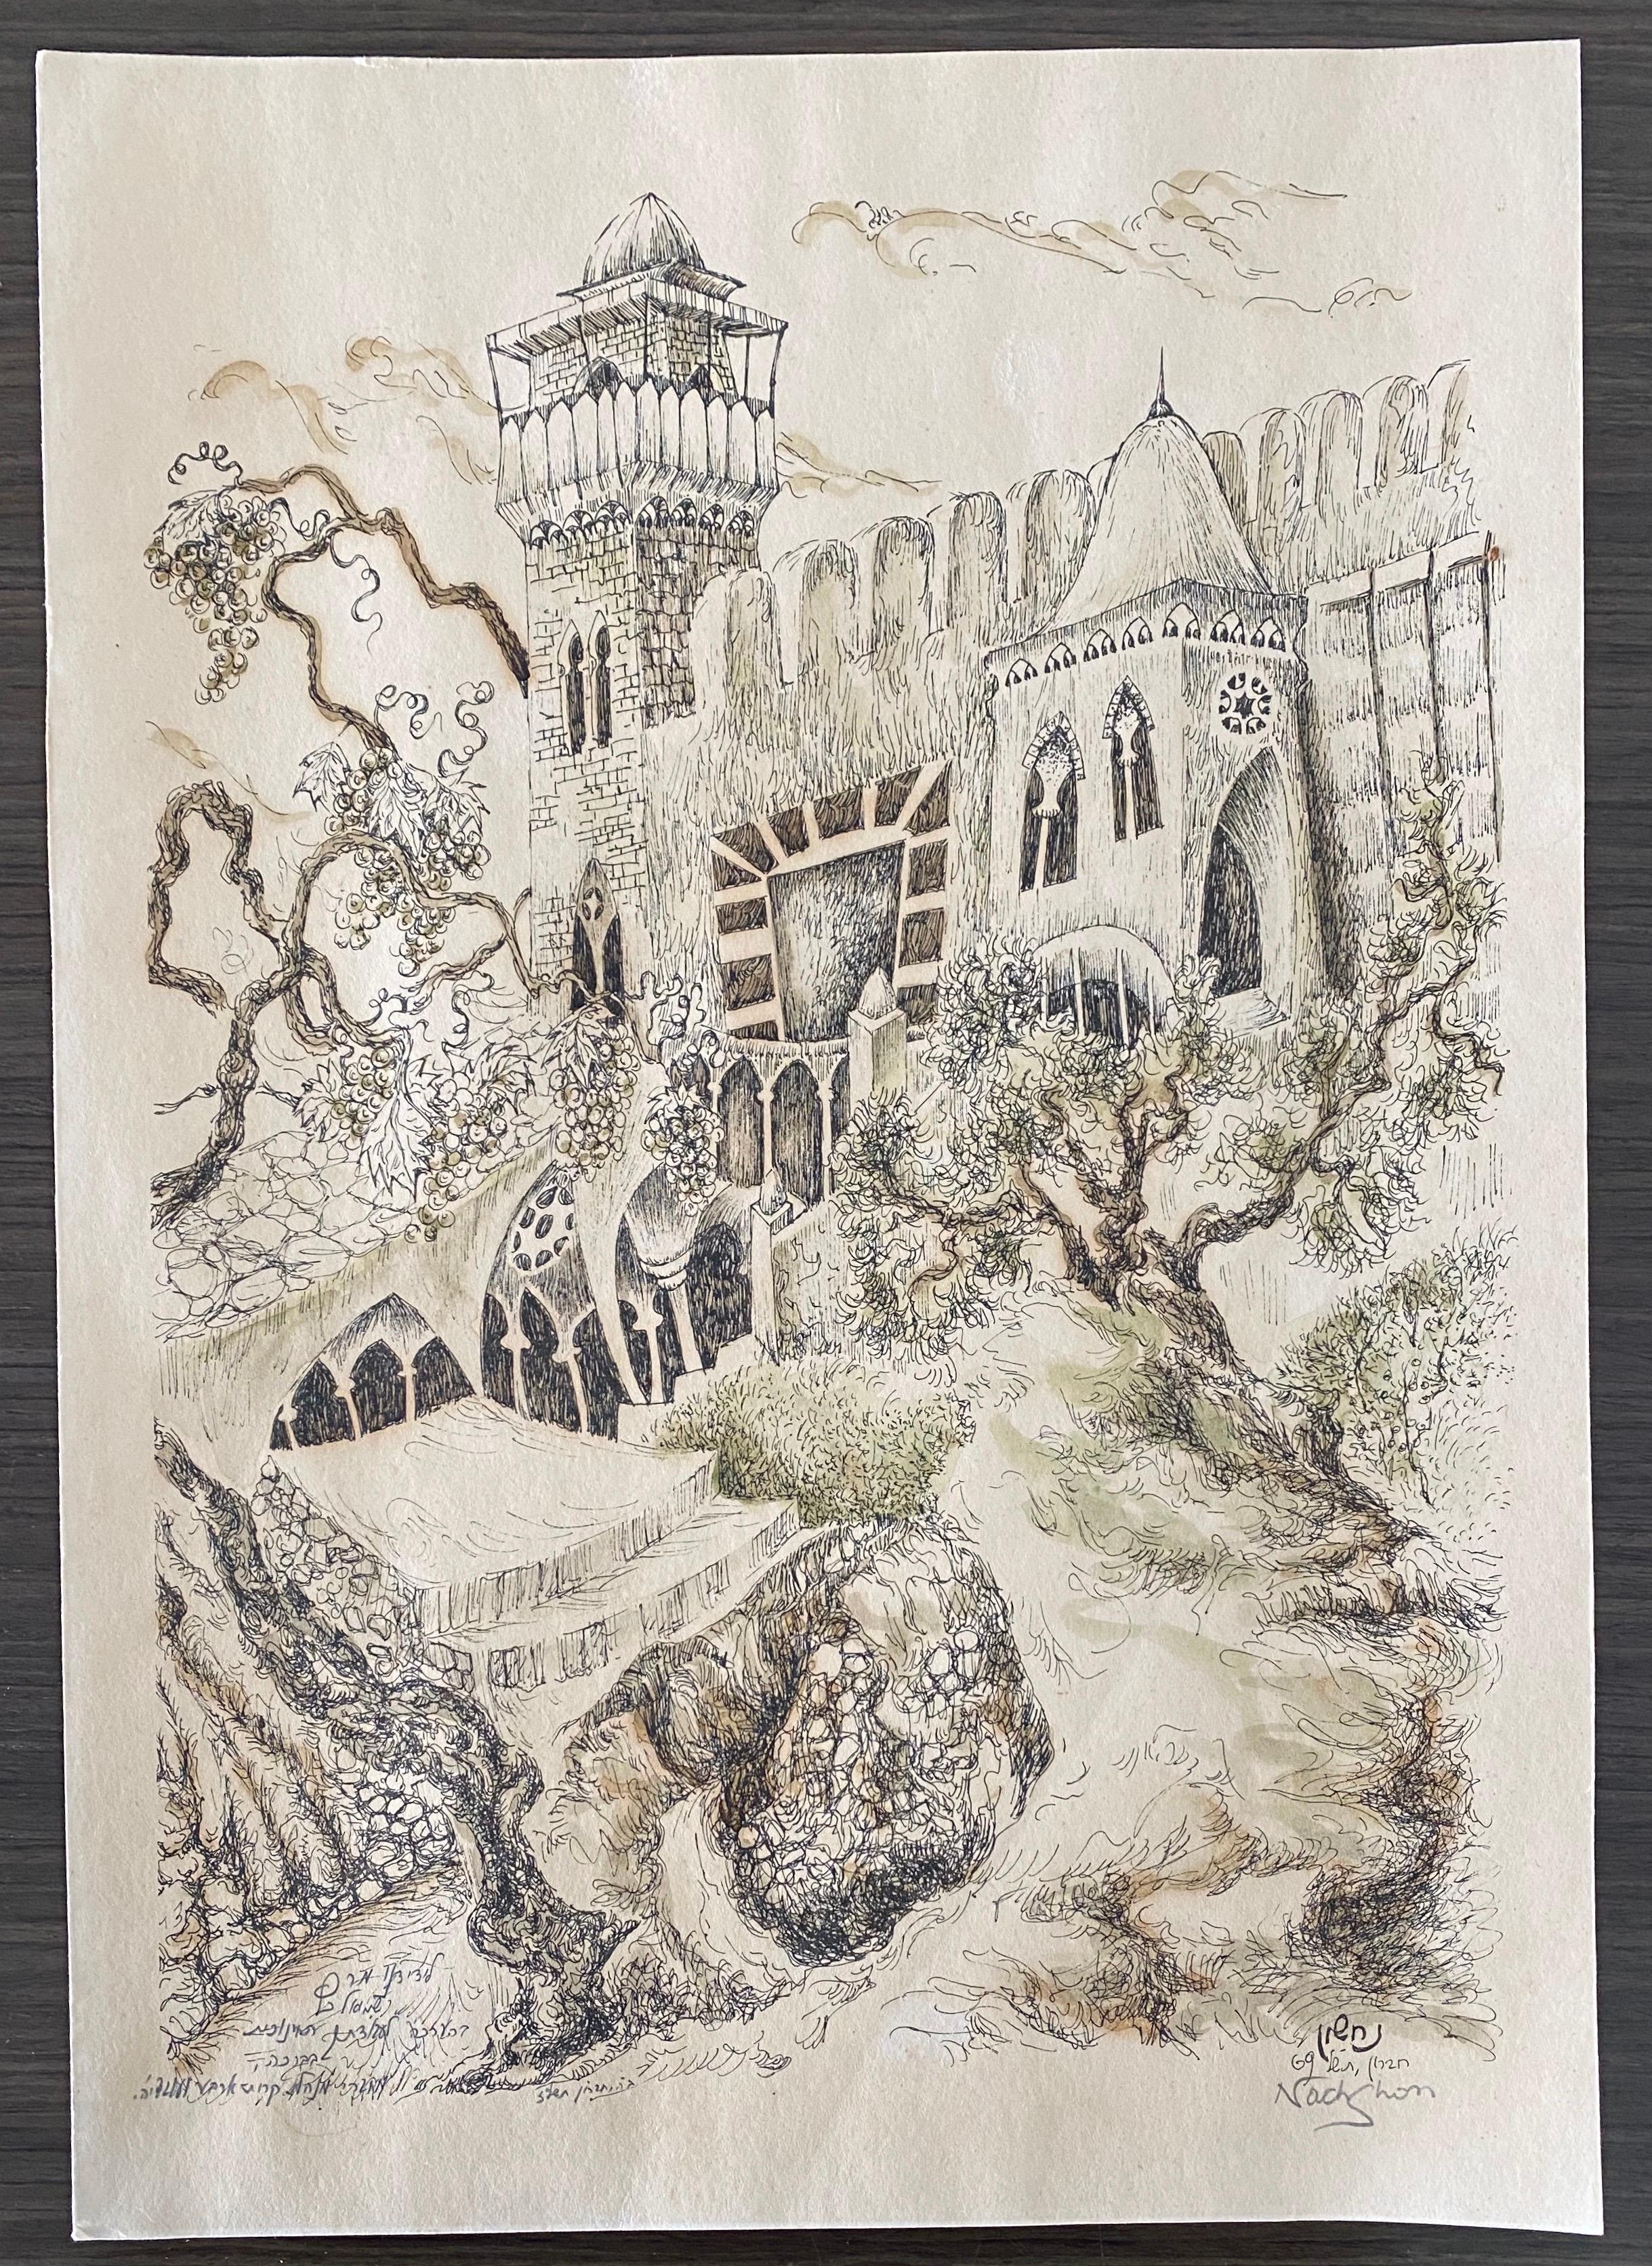 Hebron, 1969 Israeli Judaica Mixed Media Lithograph With Watercolor  - Art by Baruch Nachshon